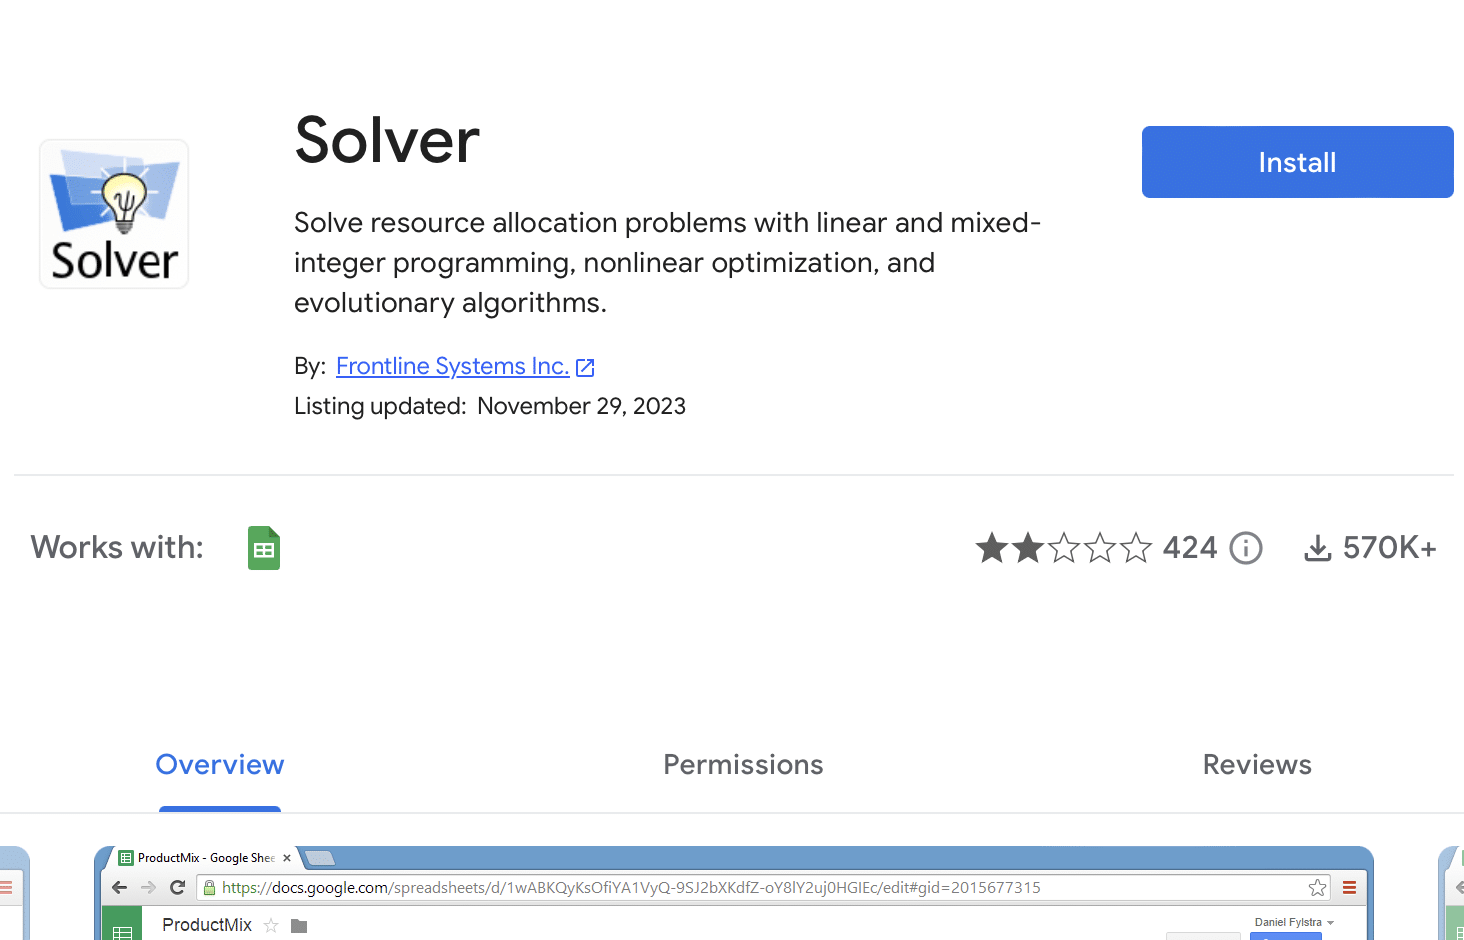 Using Solver for more advanced needs as an alternative